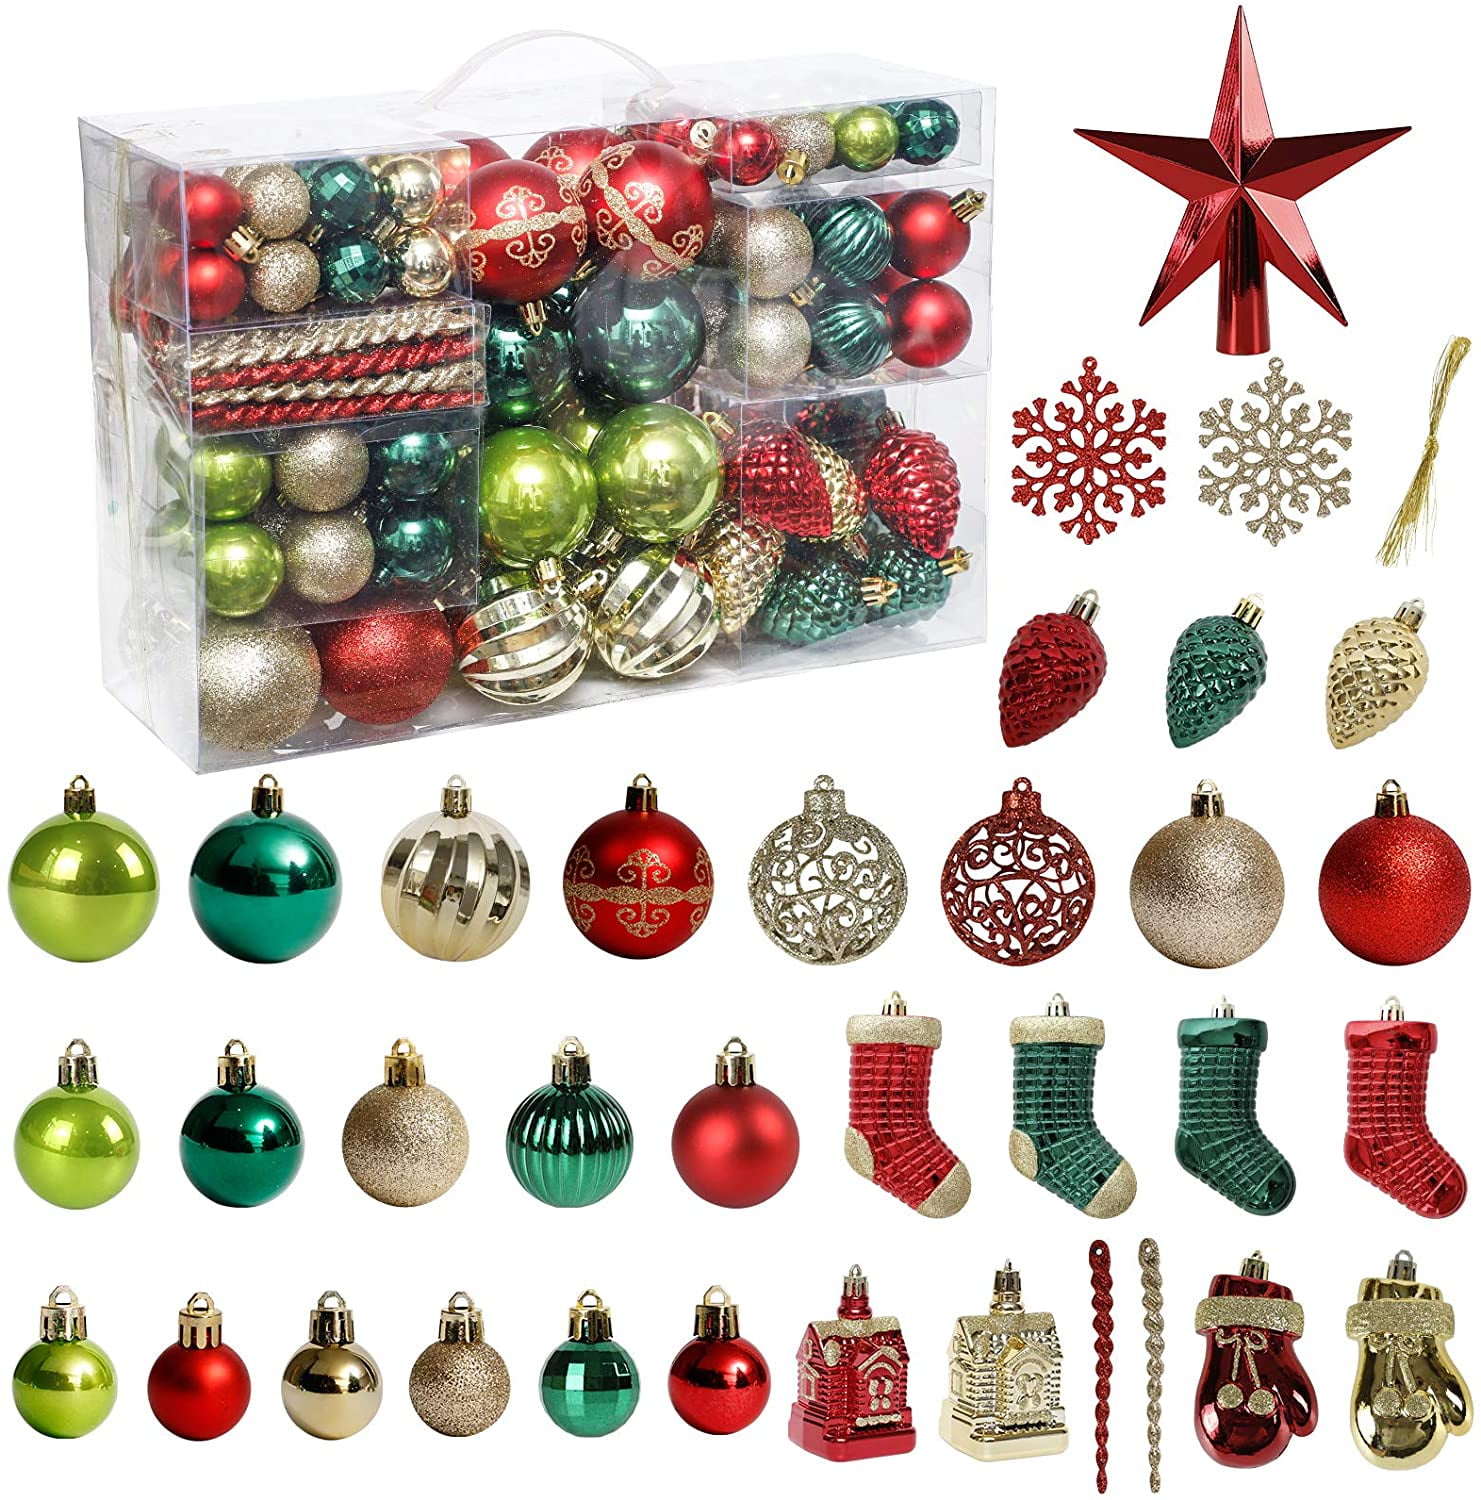 Green TOMAY 20PCS Christmas Ball Ornaments for Xmas Tree Decor 3.15 Shatterproof Christmas Decorations Clearance with Hanging Rope